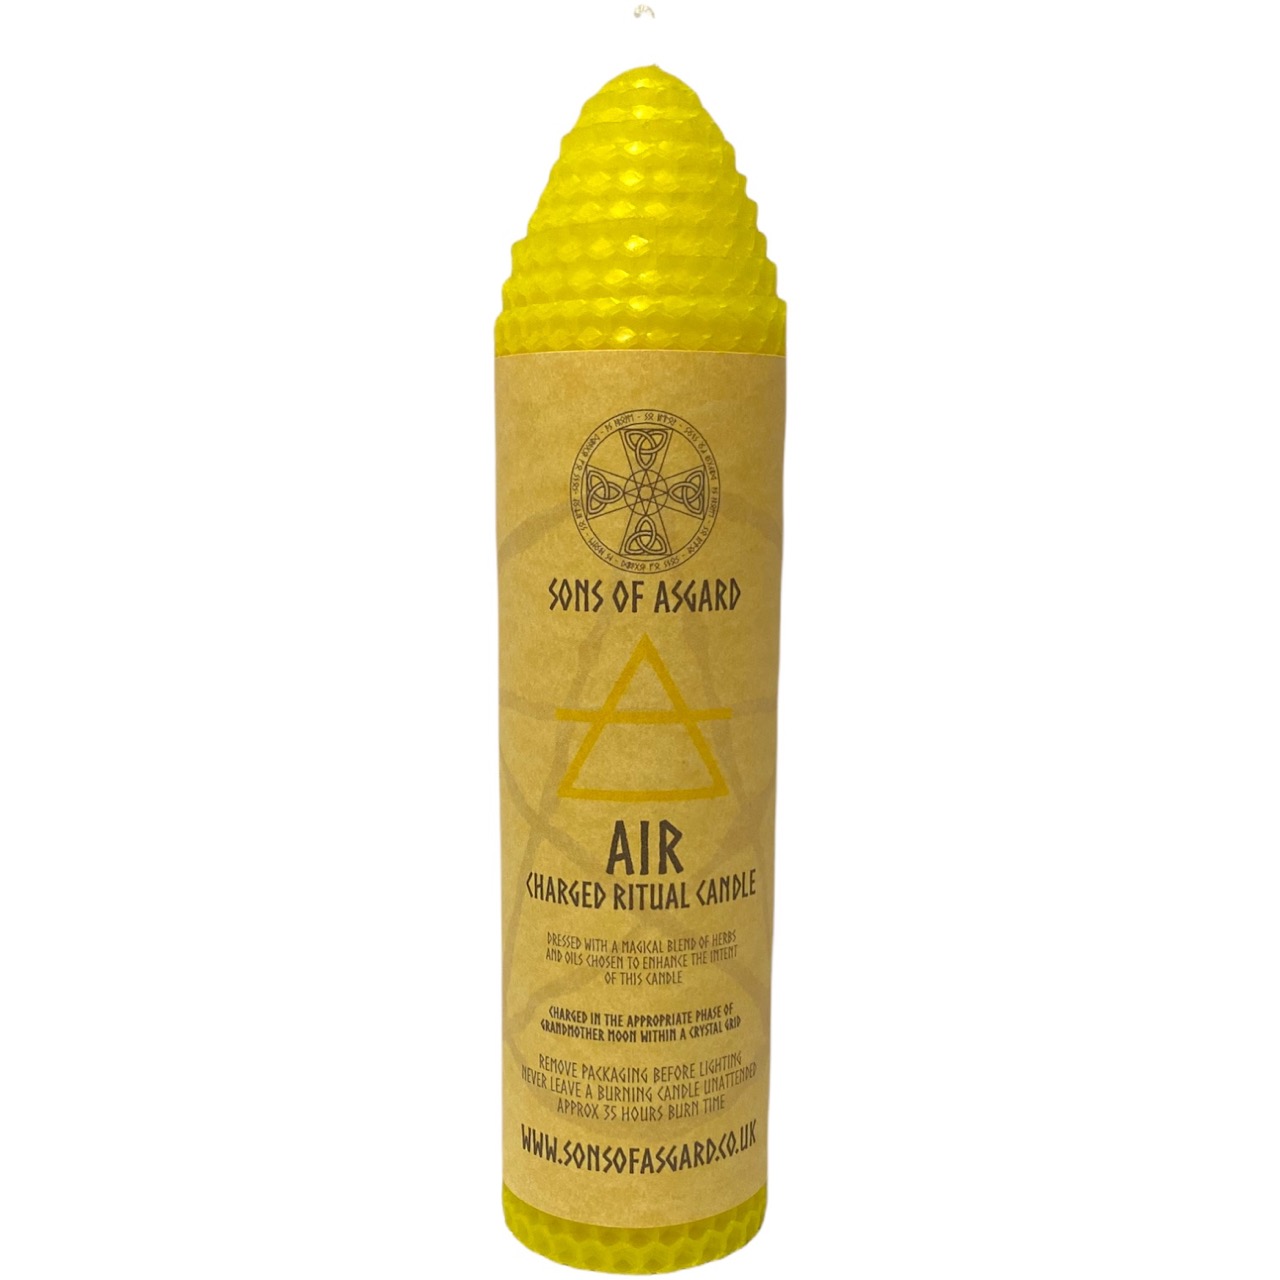 Elemental - Air - Beeswax Ritual Candle